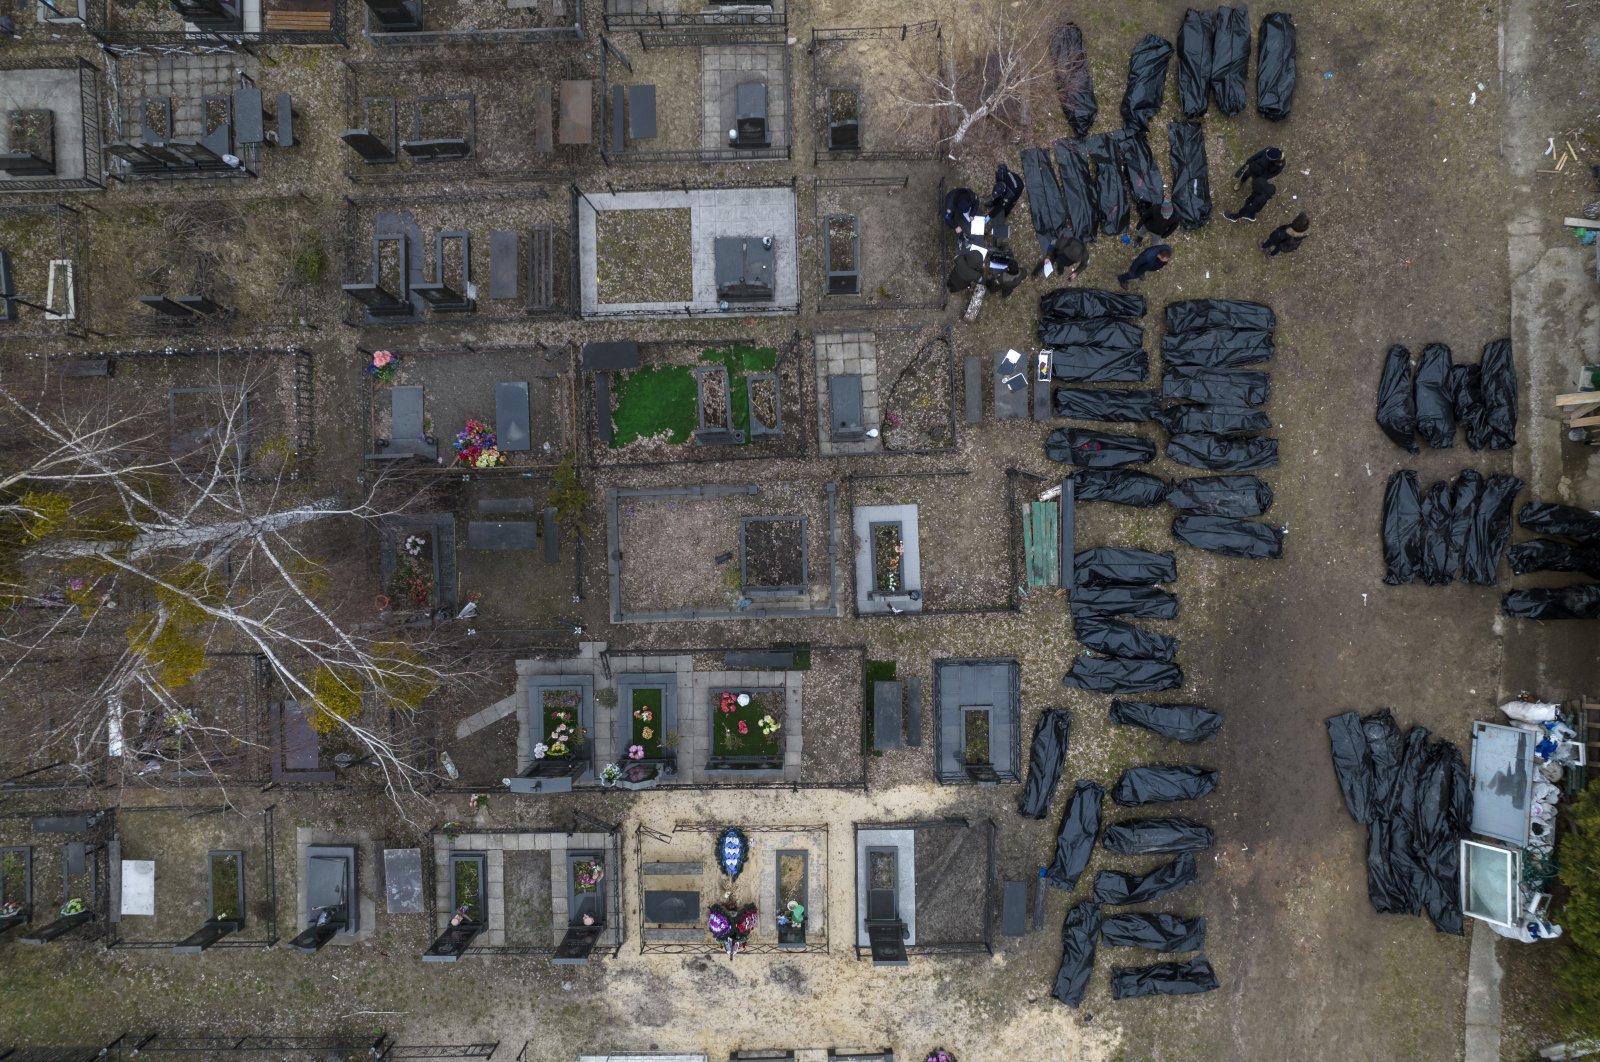 Police officers work to identify civilians killed during the Russian occupation in Bucha, Ukraine, on the outskirts of Kyiv, before sending the bodies to the morgue, April 6, 2022. (AP Photo)